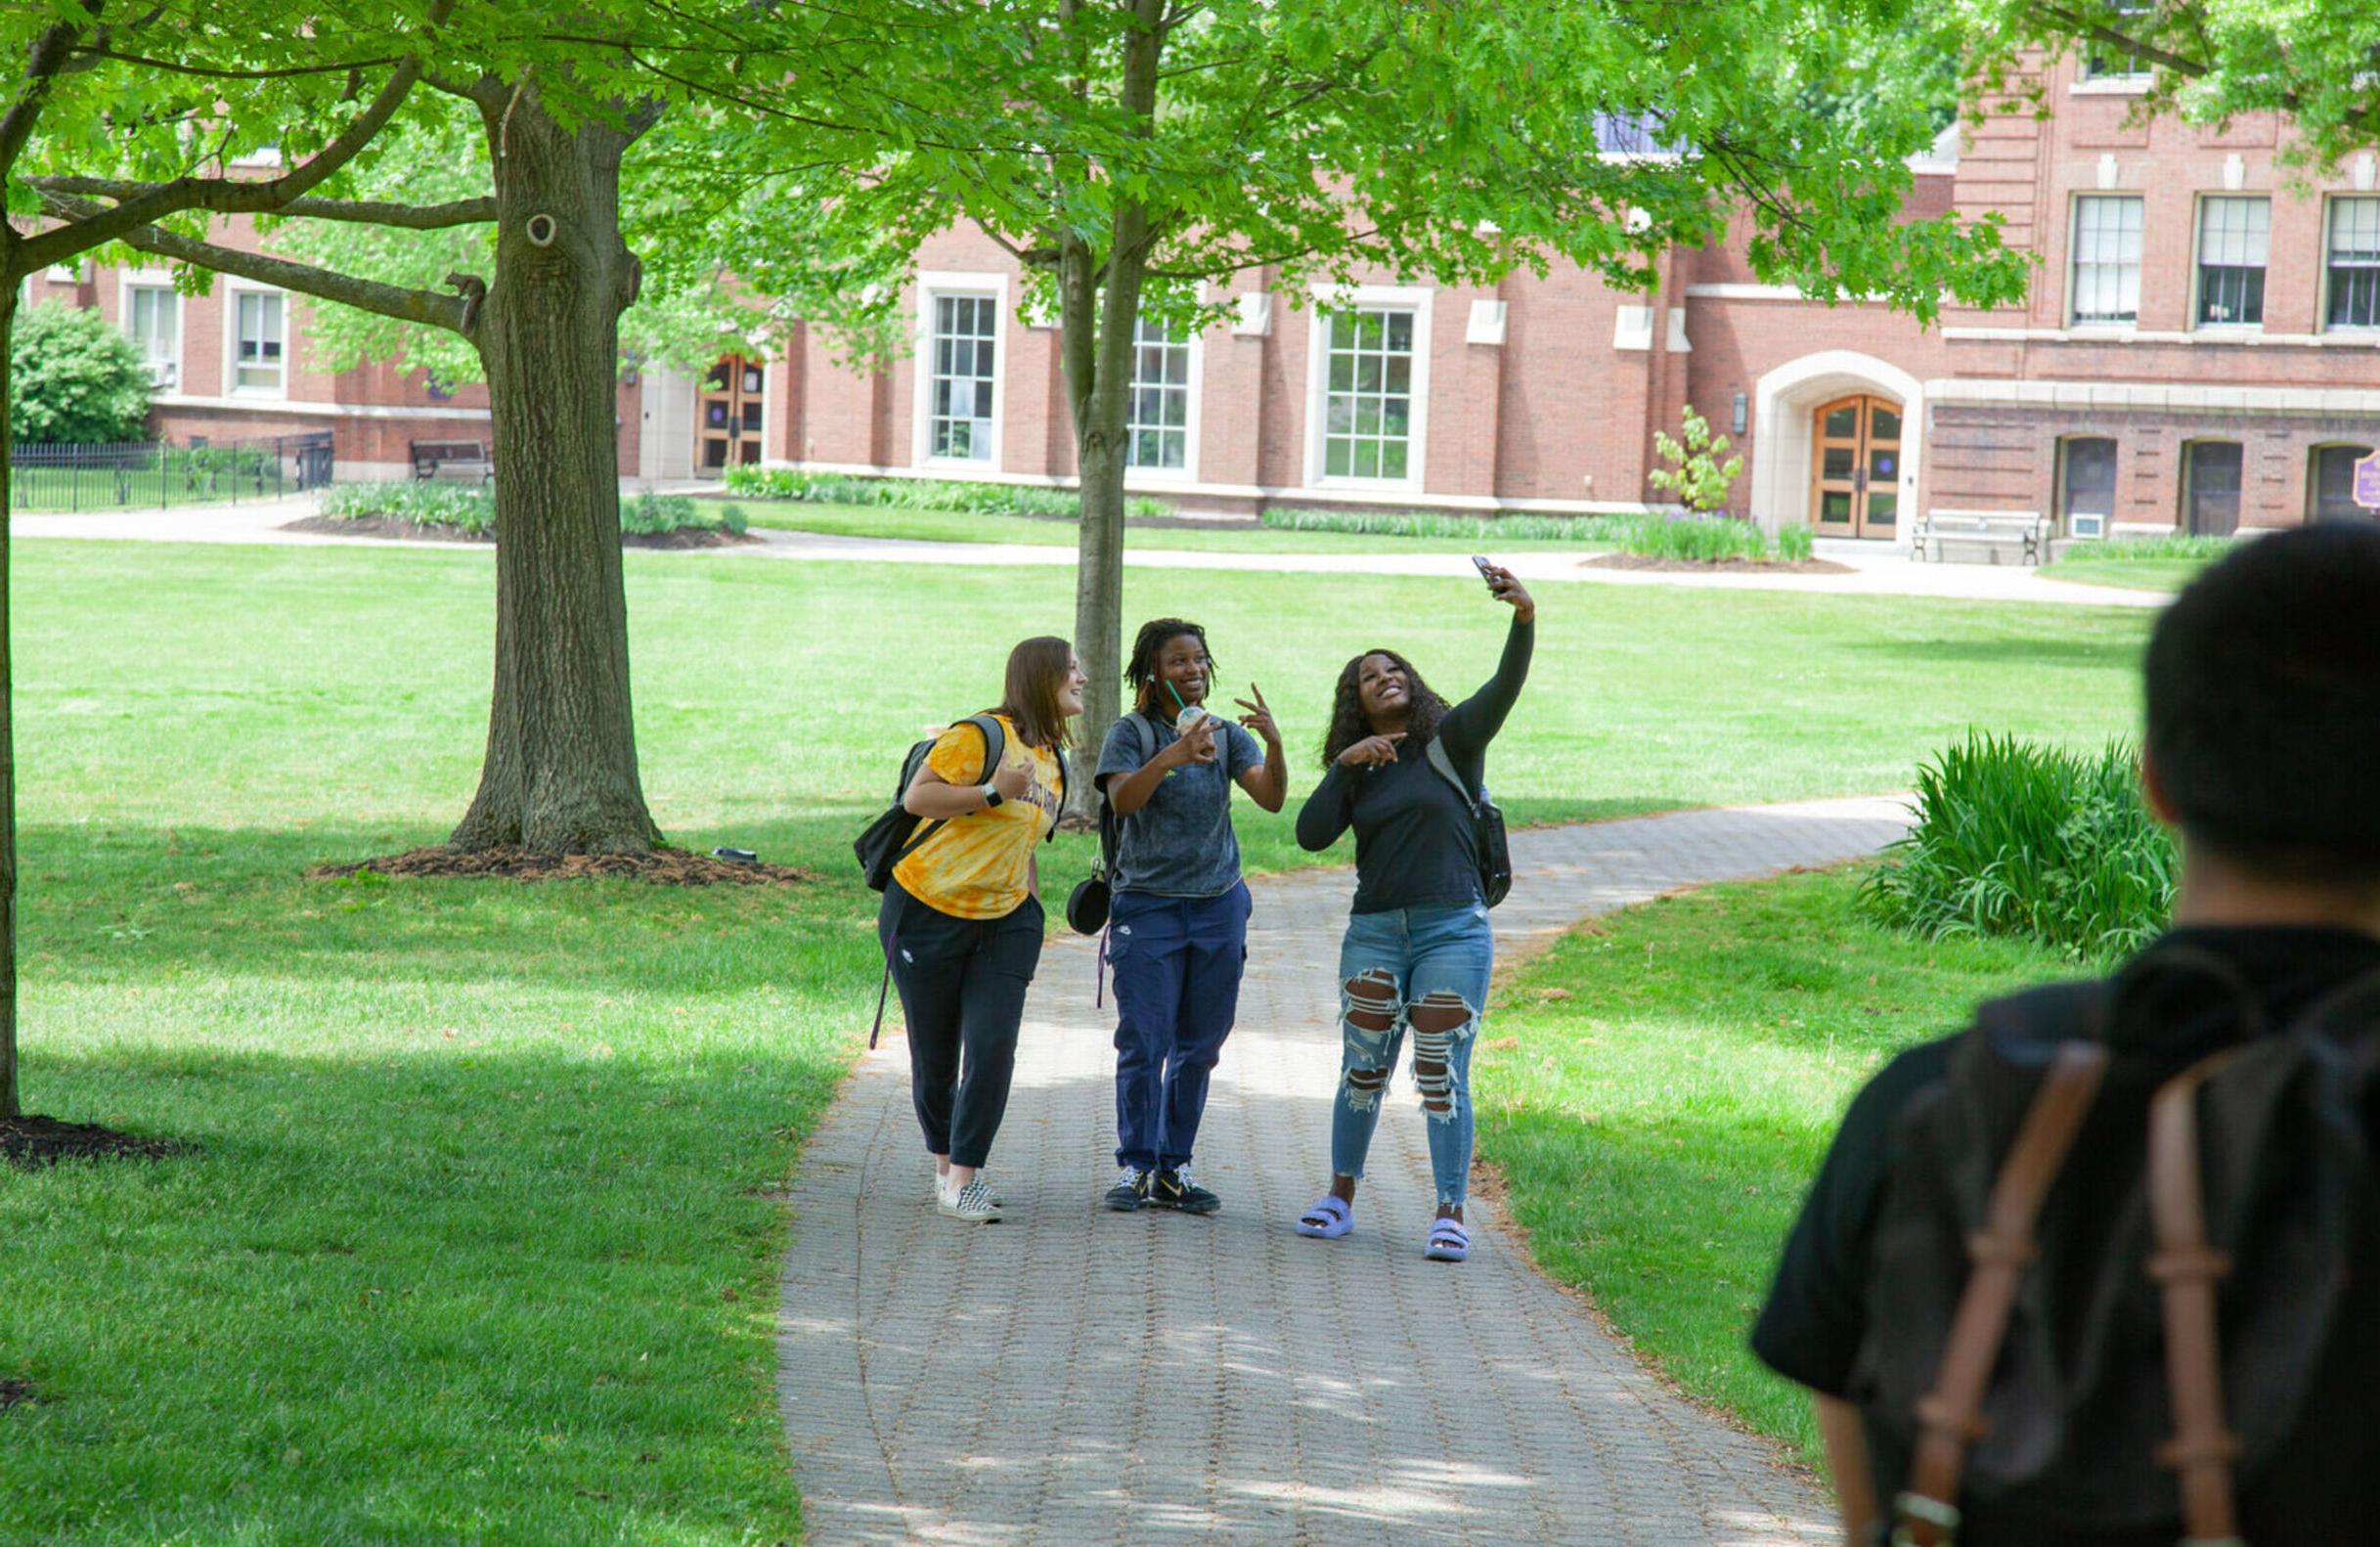 Students take a selfie on campus